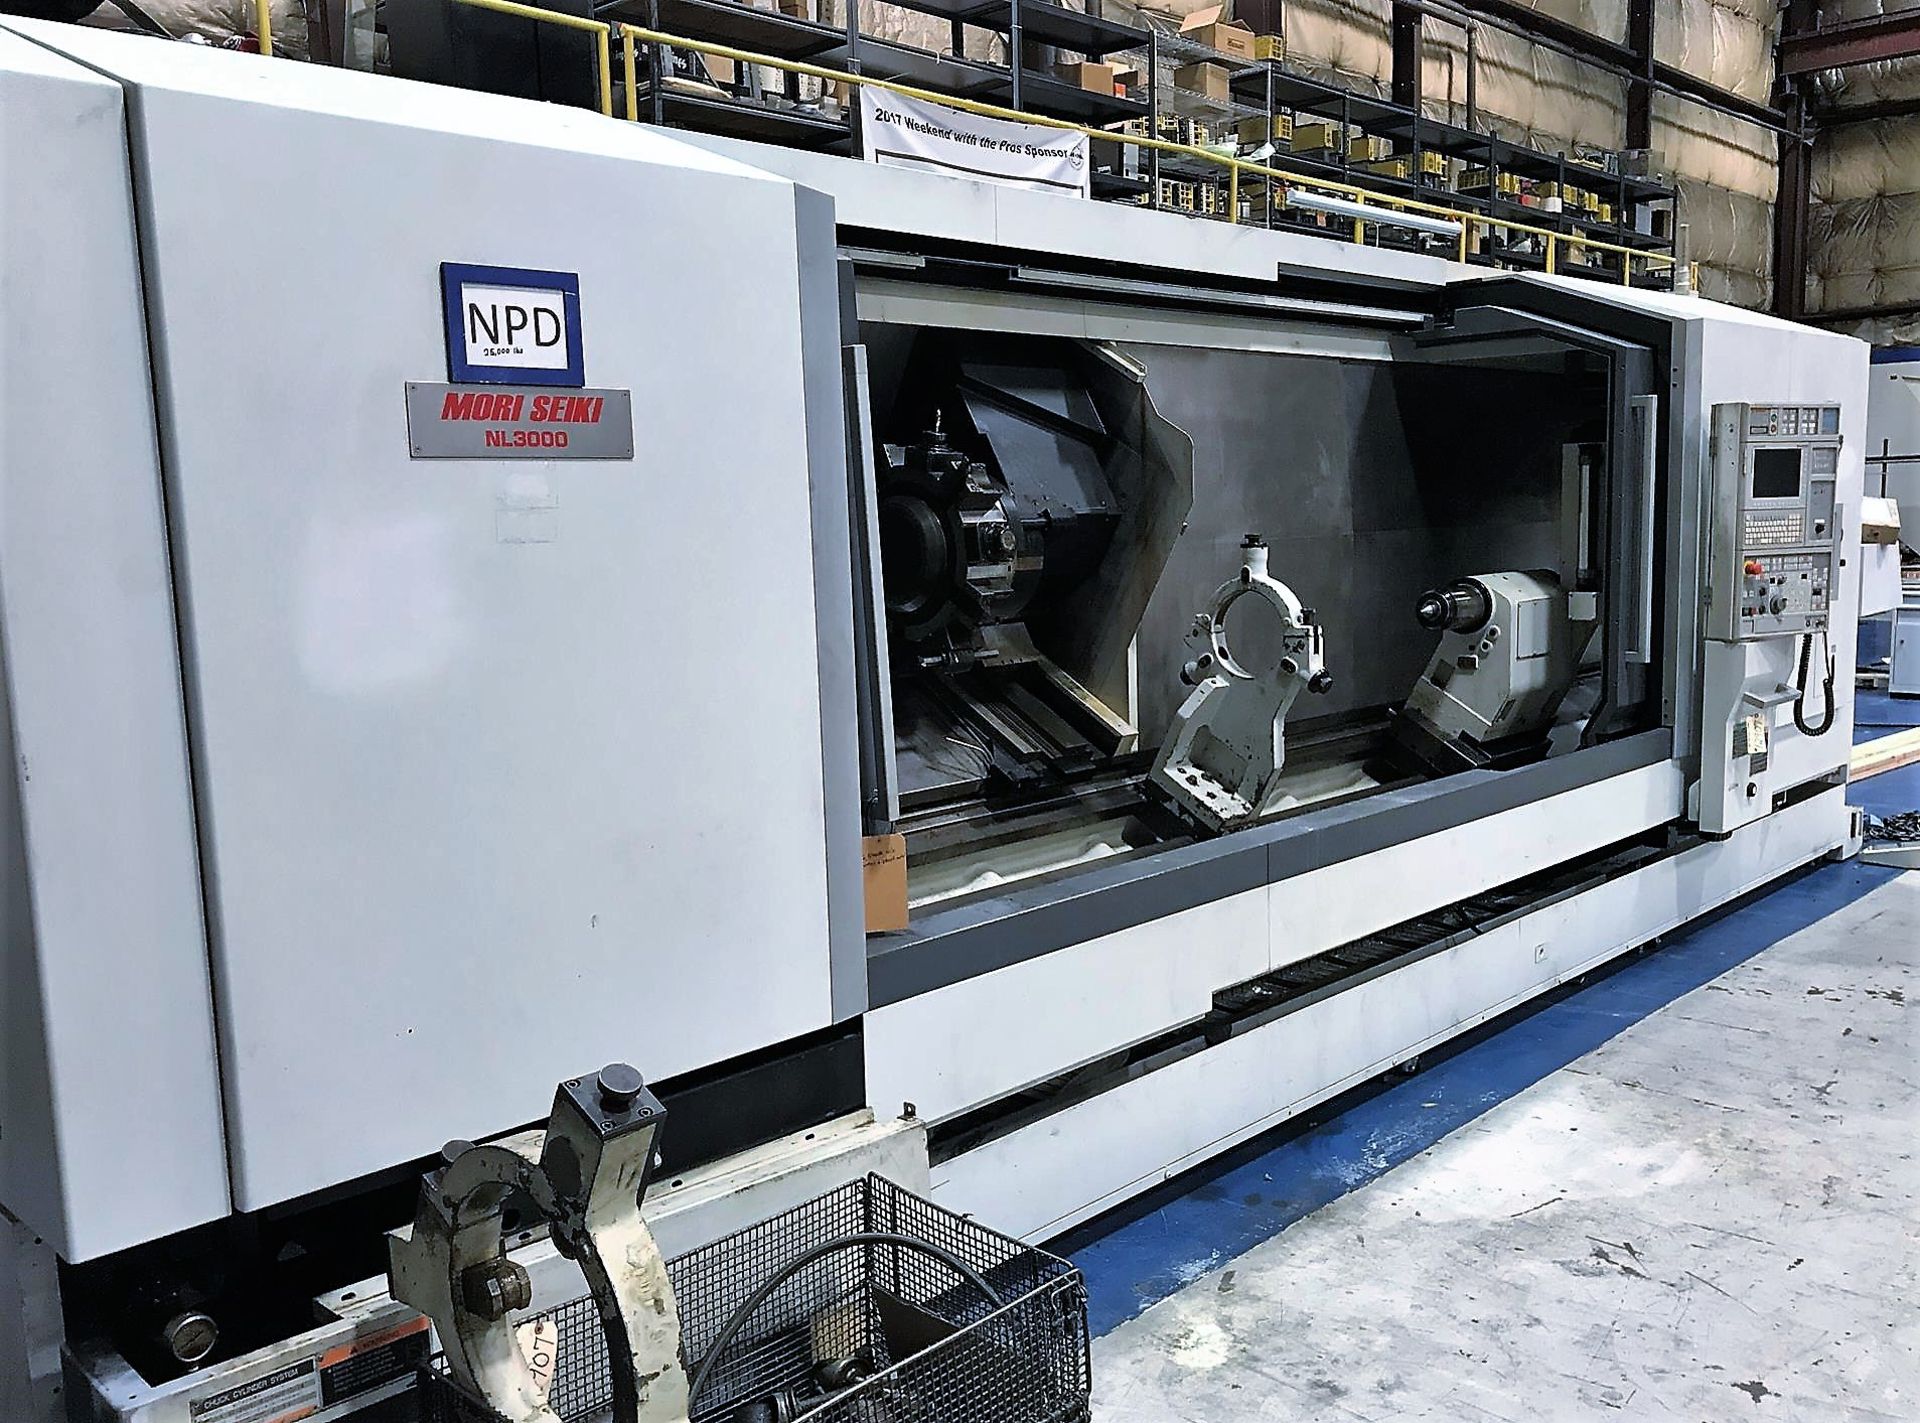 16.5" x 120" Mori Seiki NL3000Y/3000 CNC Turning Center Lathe w/Milling & Y-Axis, S/N 11986, New 201 - Image 16 of 17